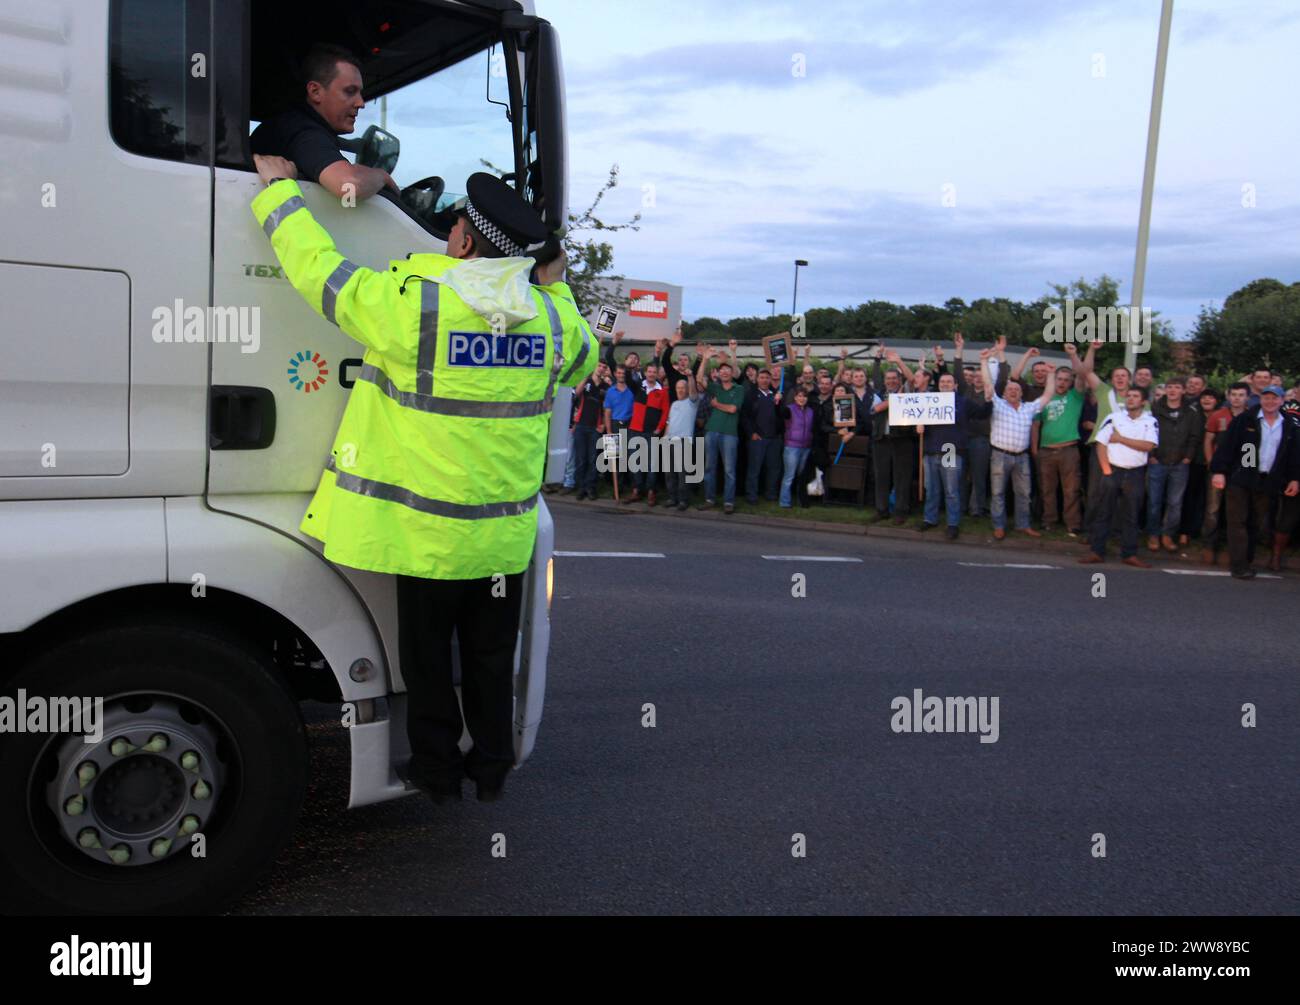 22/07/12..As protesters jeer at the lorry, a police office talks to the milk tanker driver outside the Muller processing plant in Market Drayton. ..On Stock Photo